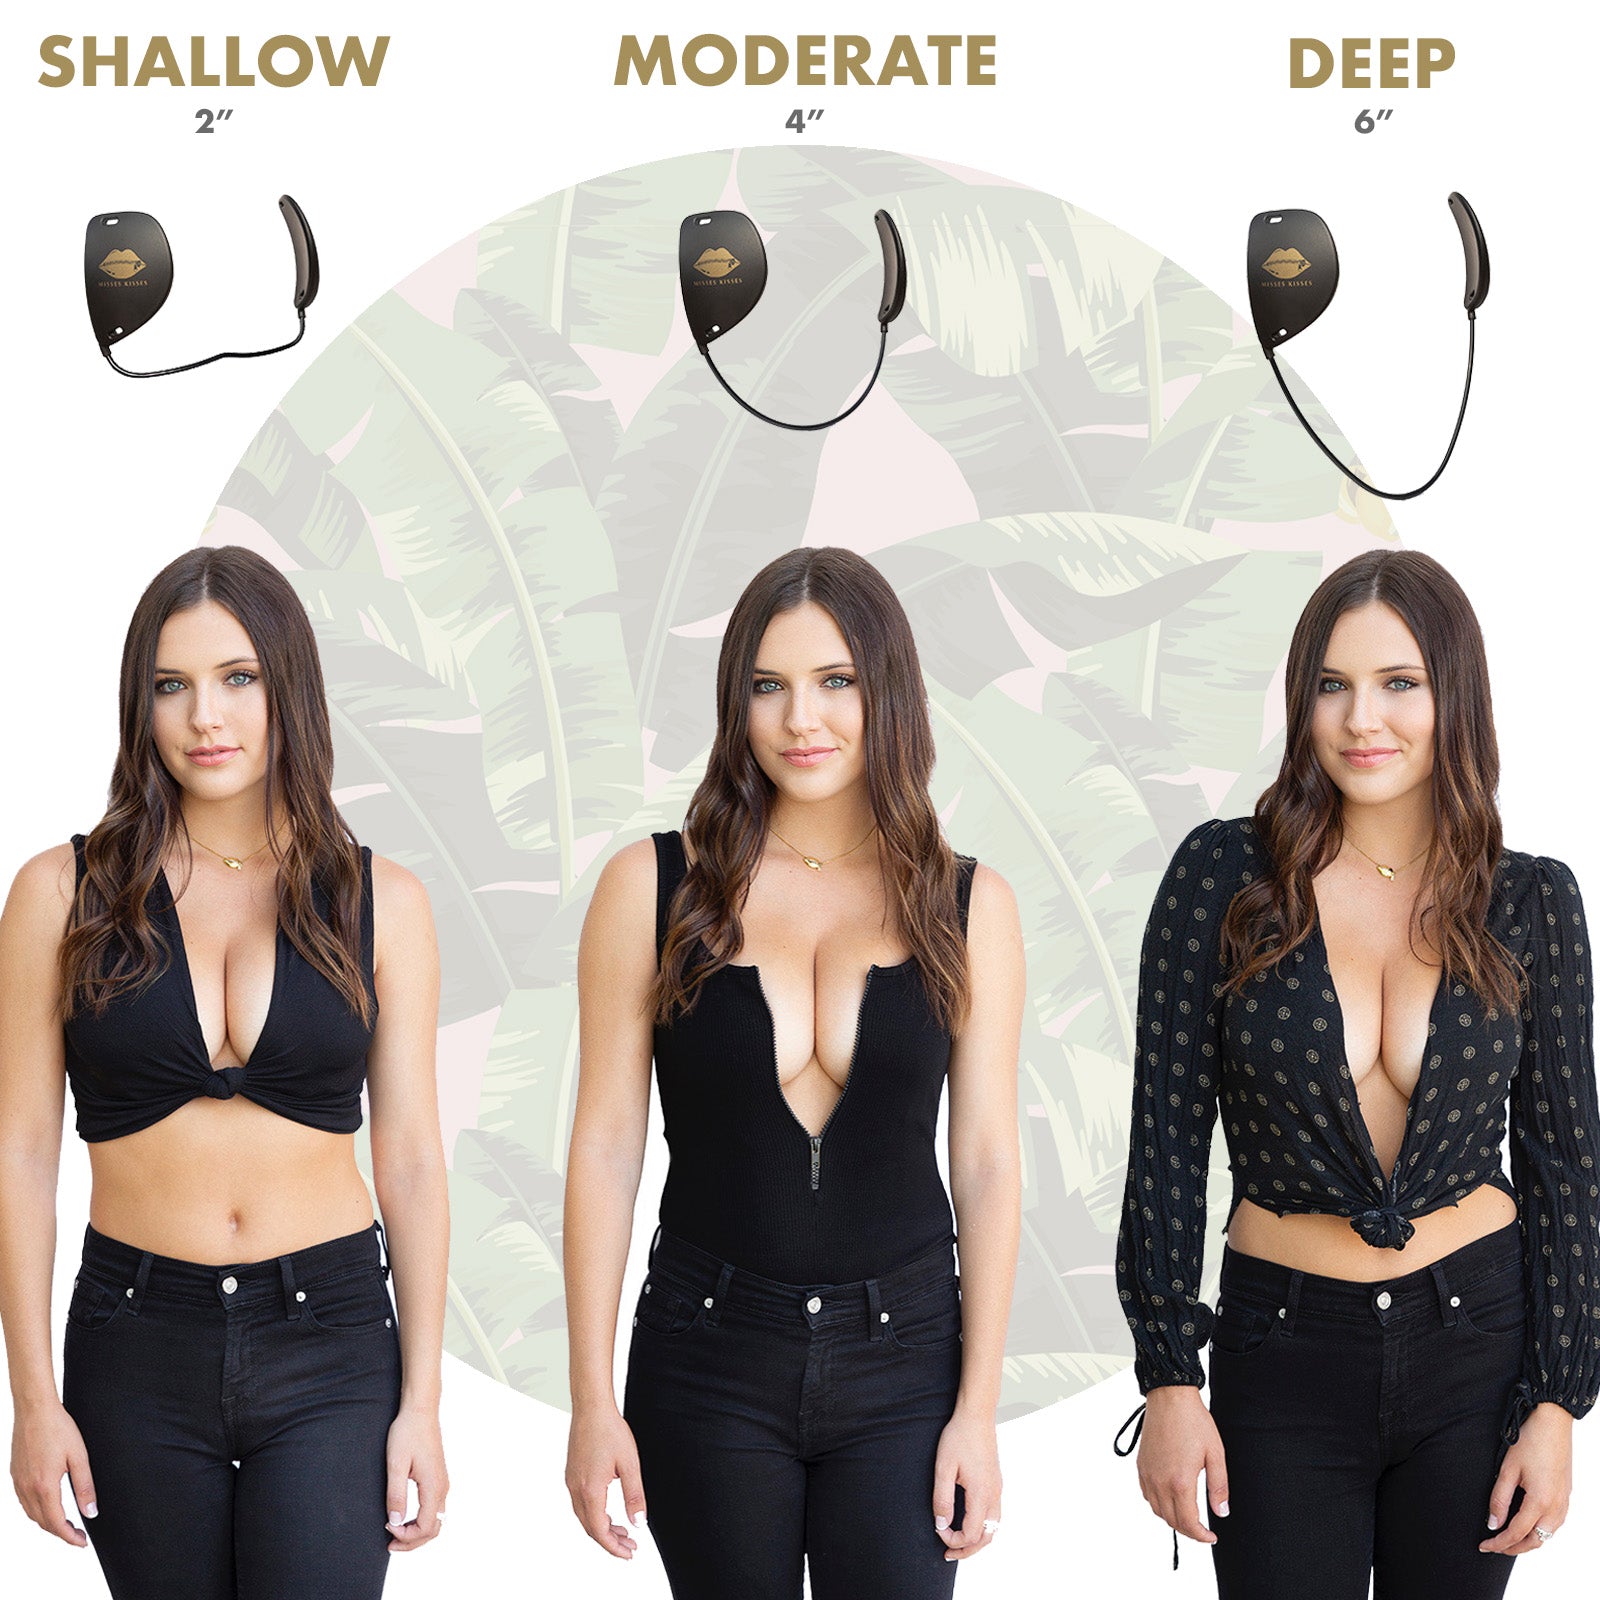 Frontless Backless And Strapless Push Up Bra Kit